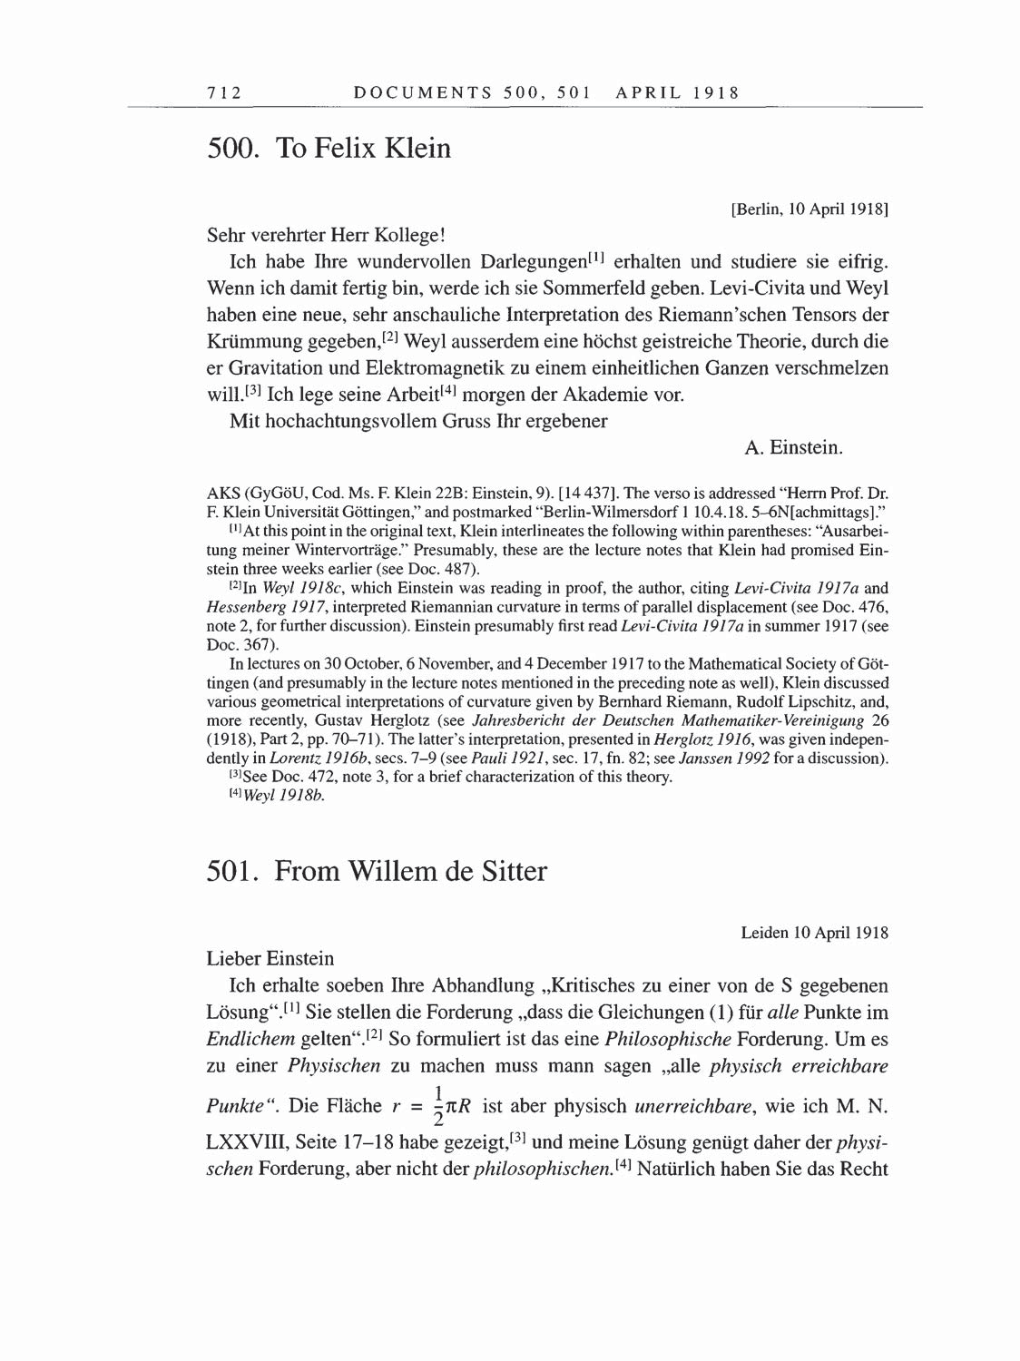 Volume 8, Part B: The Berlin Years: Correspondence 1918 page 712